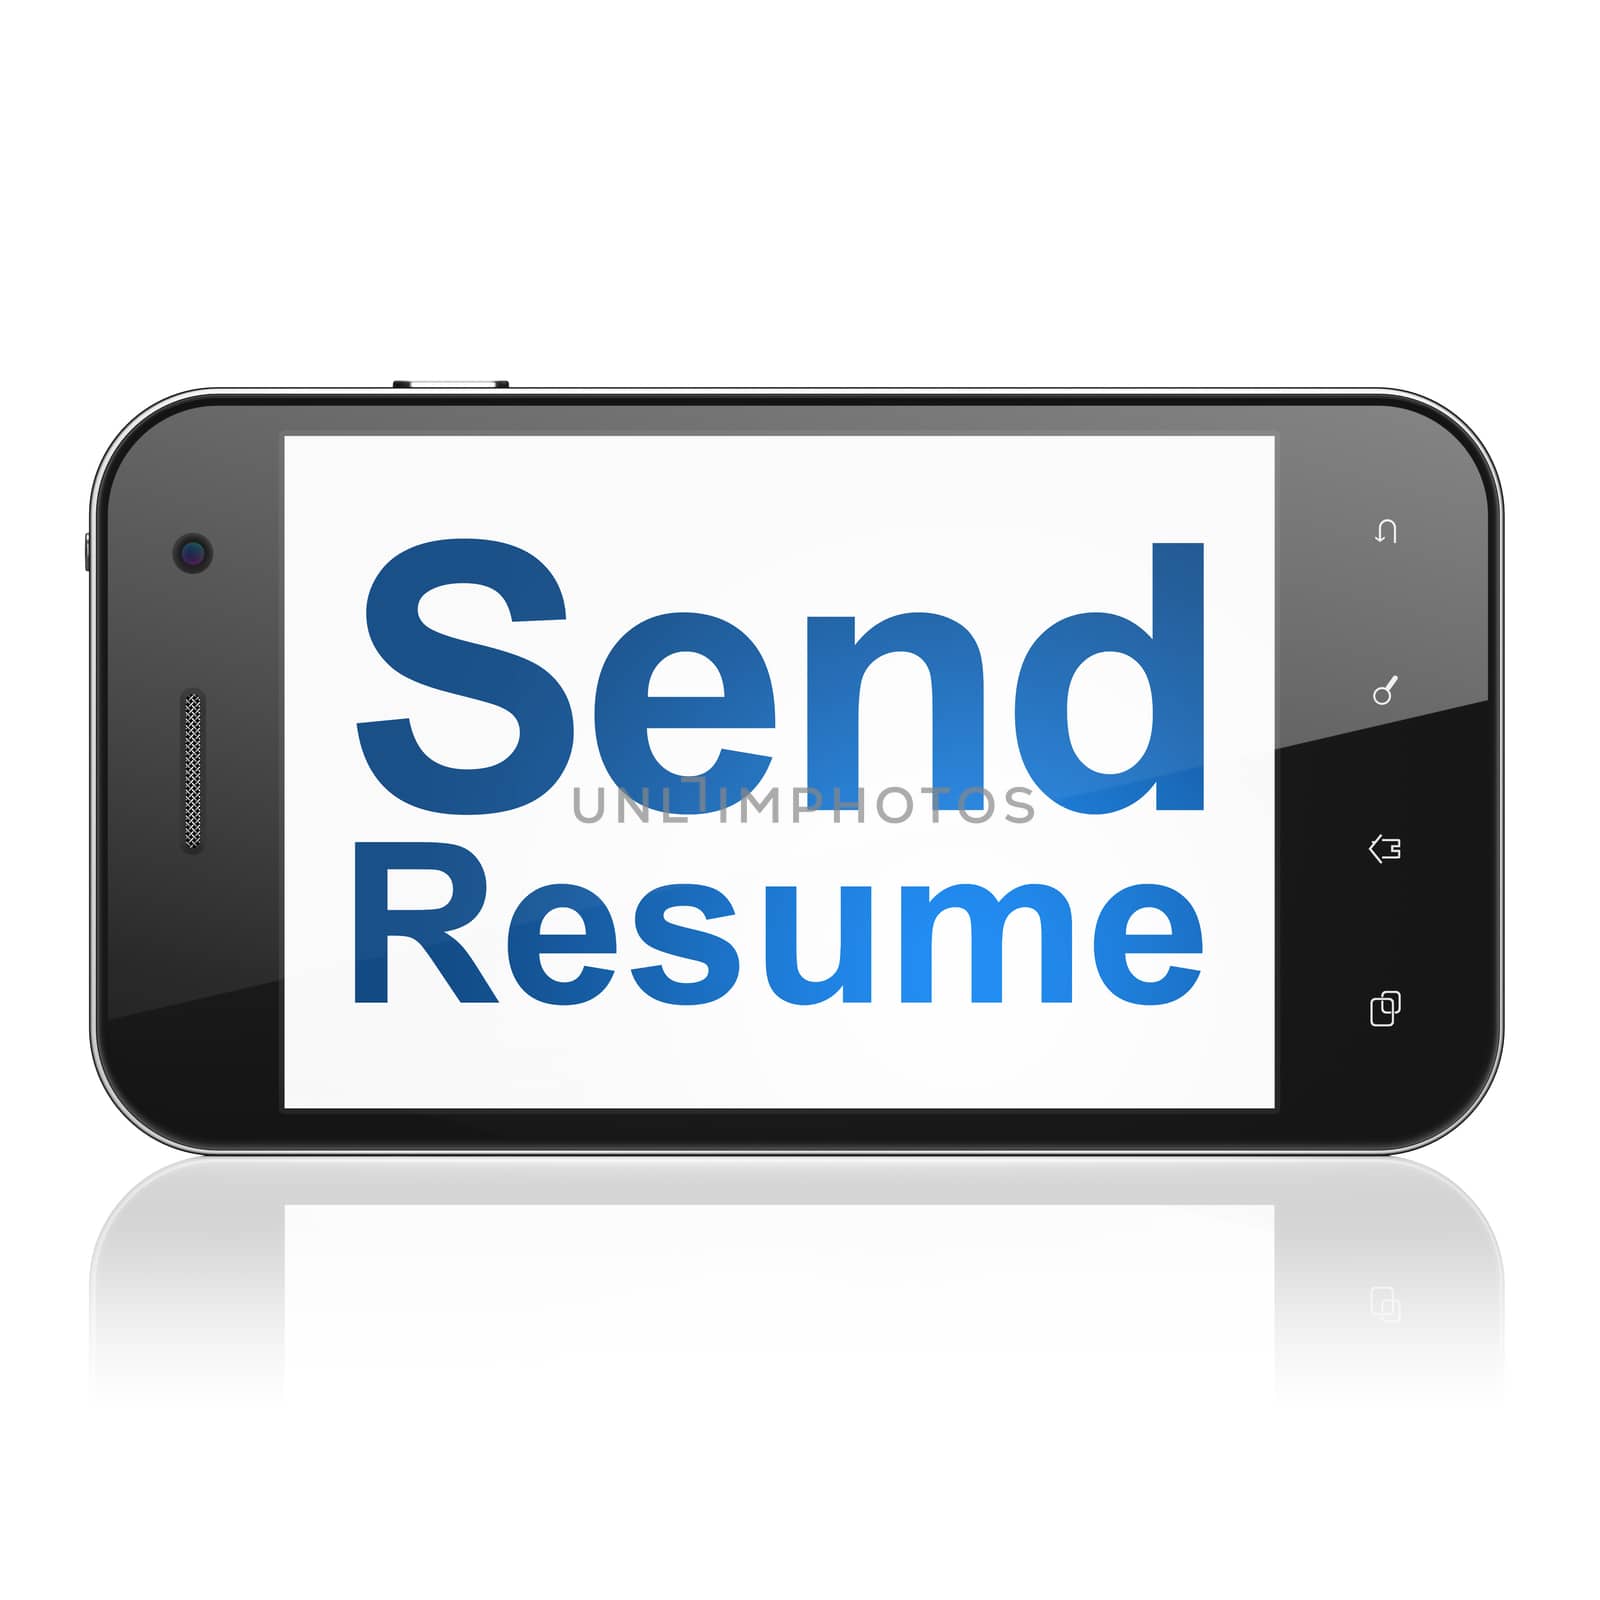 Business concept: smartphone with text Send Resume on display. Mobile smart phone on White background, cell phone 3d render